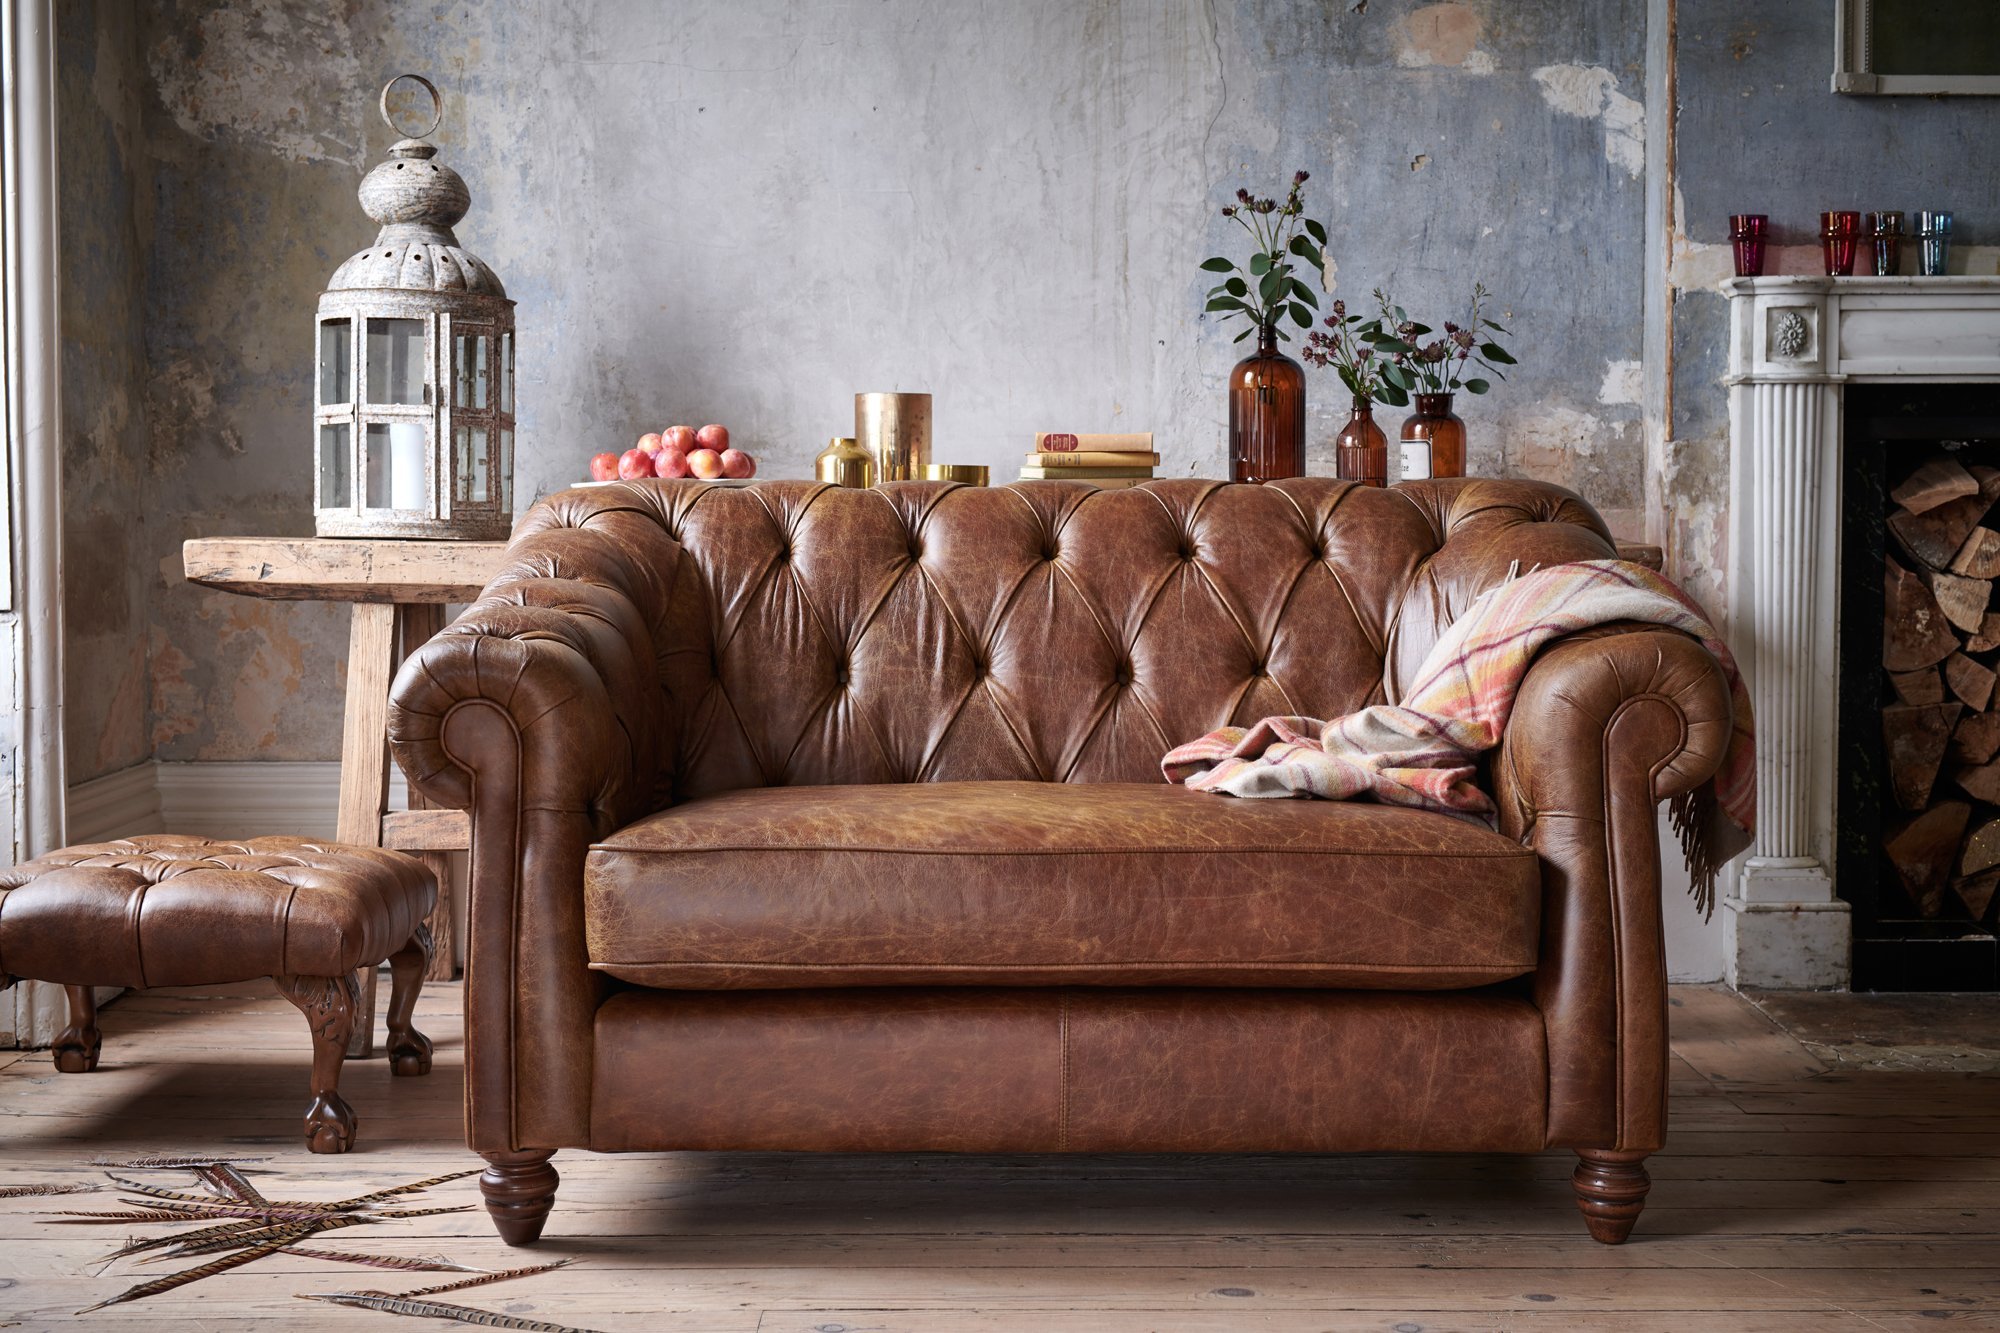 Tips To Keep Your Leather Sofa Looking, How To Get Ink Out Of A Cream Leather Sofa